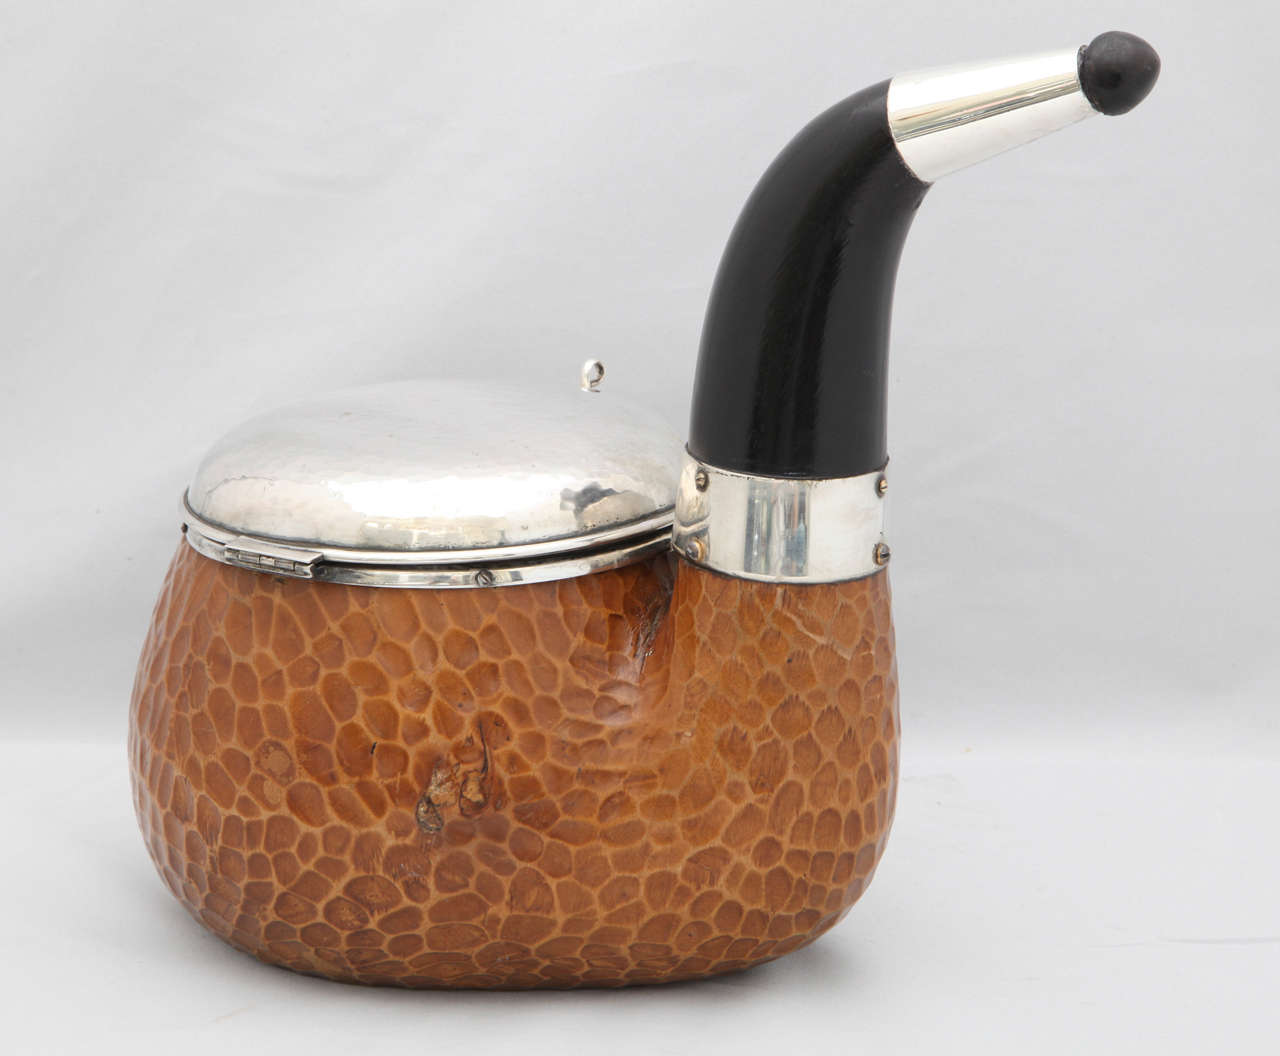 Very unusual, large, continental (.800) silver-mounted - wood, pipe-form humidor with hinged lid, Italy, circa 1940's. Measures: 11 1/2 inches wide x 9 1/2 inches high (at highest point) x 6 1/2 inches deep/diameter. Wood is carved so that it looks